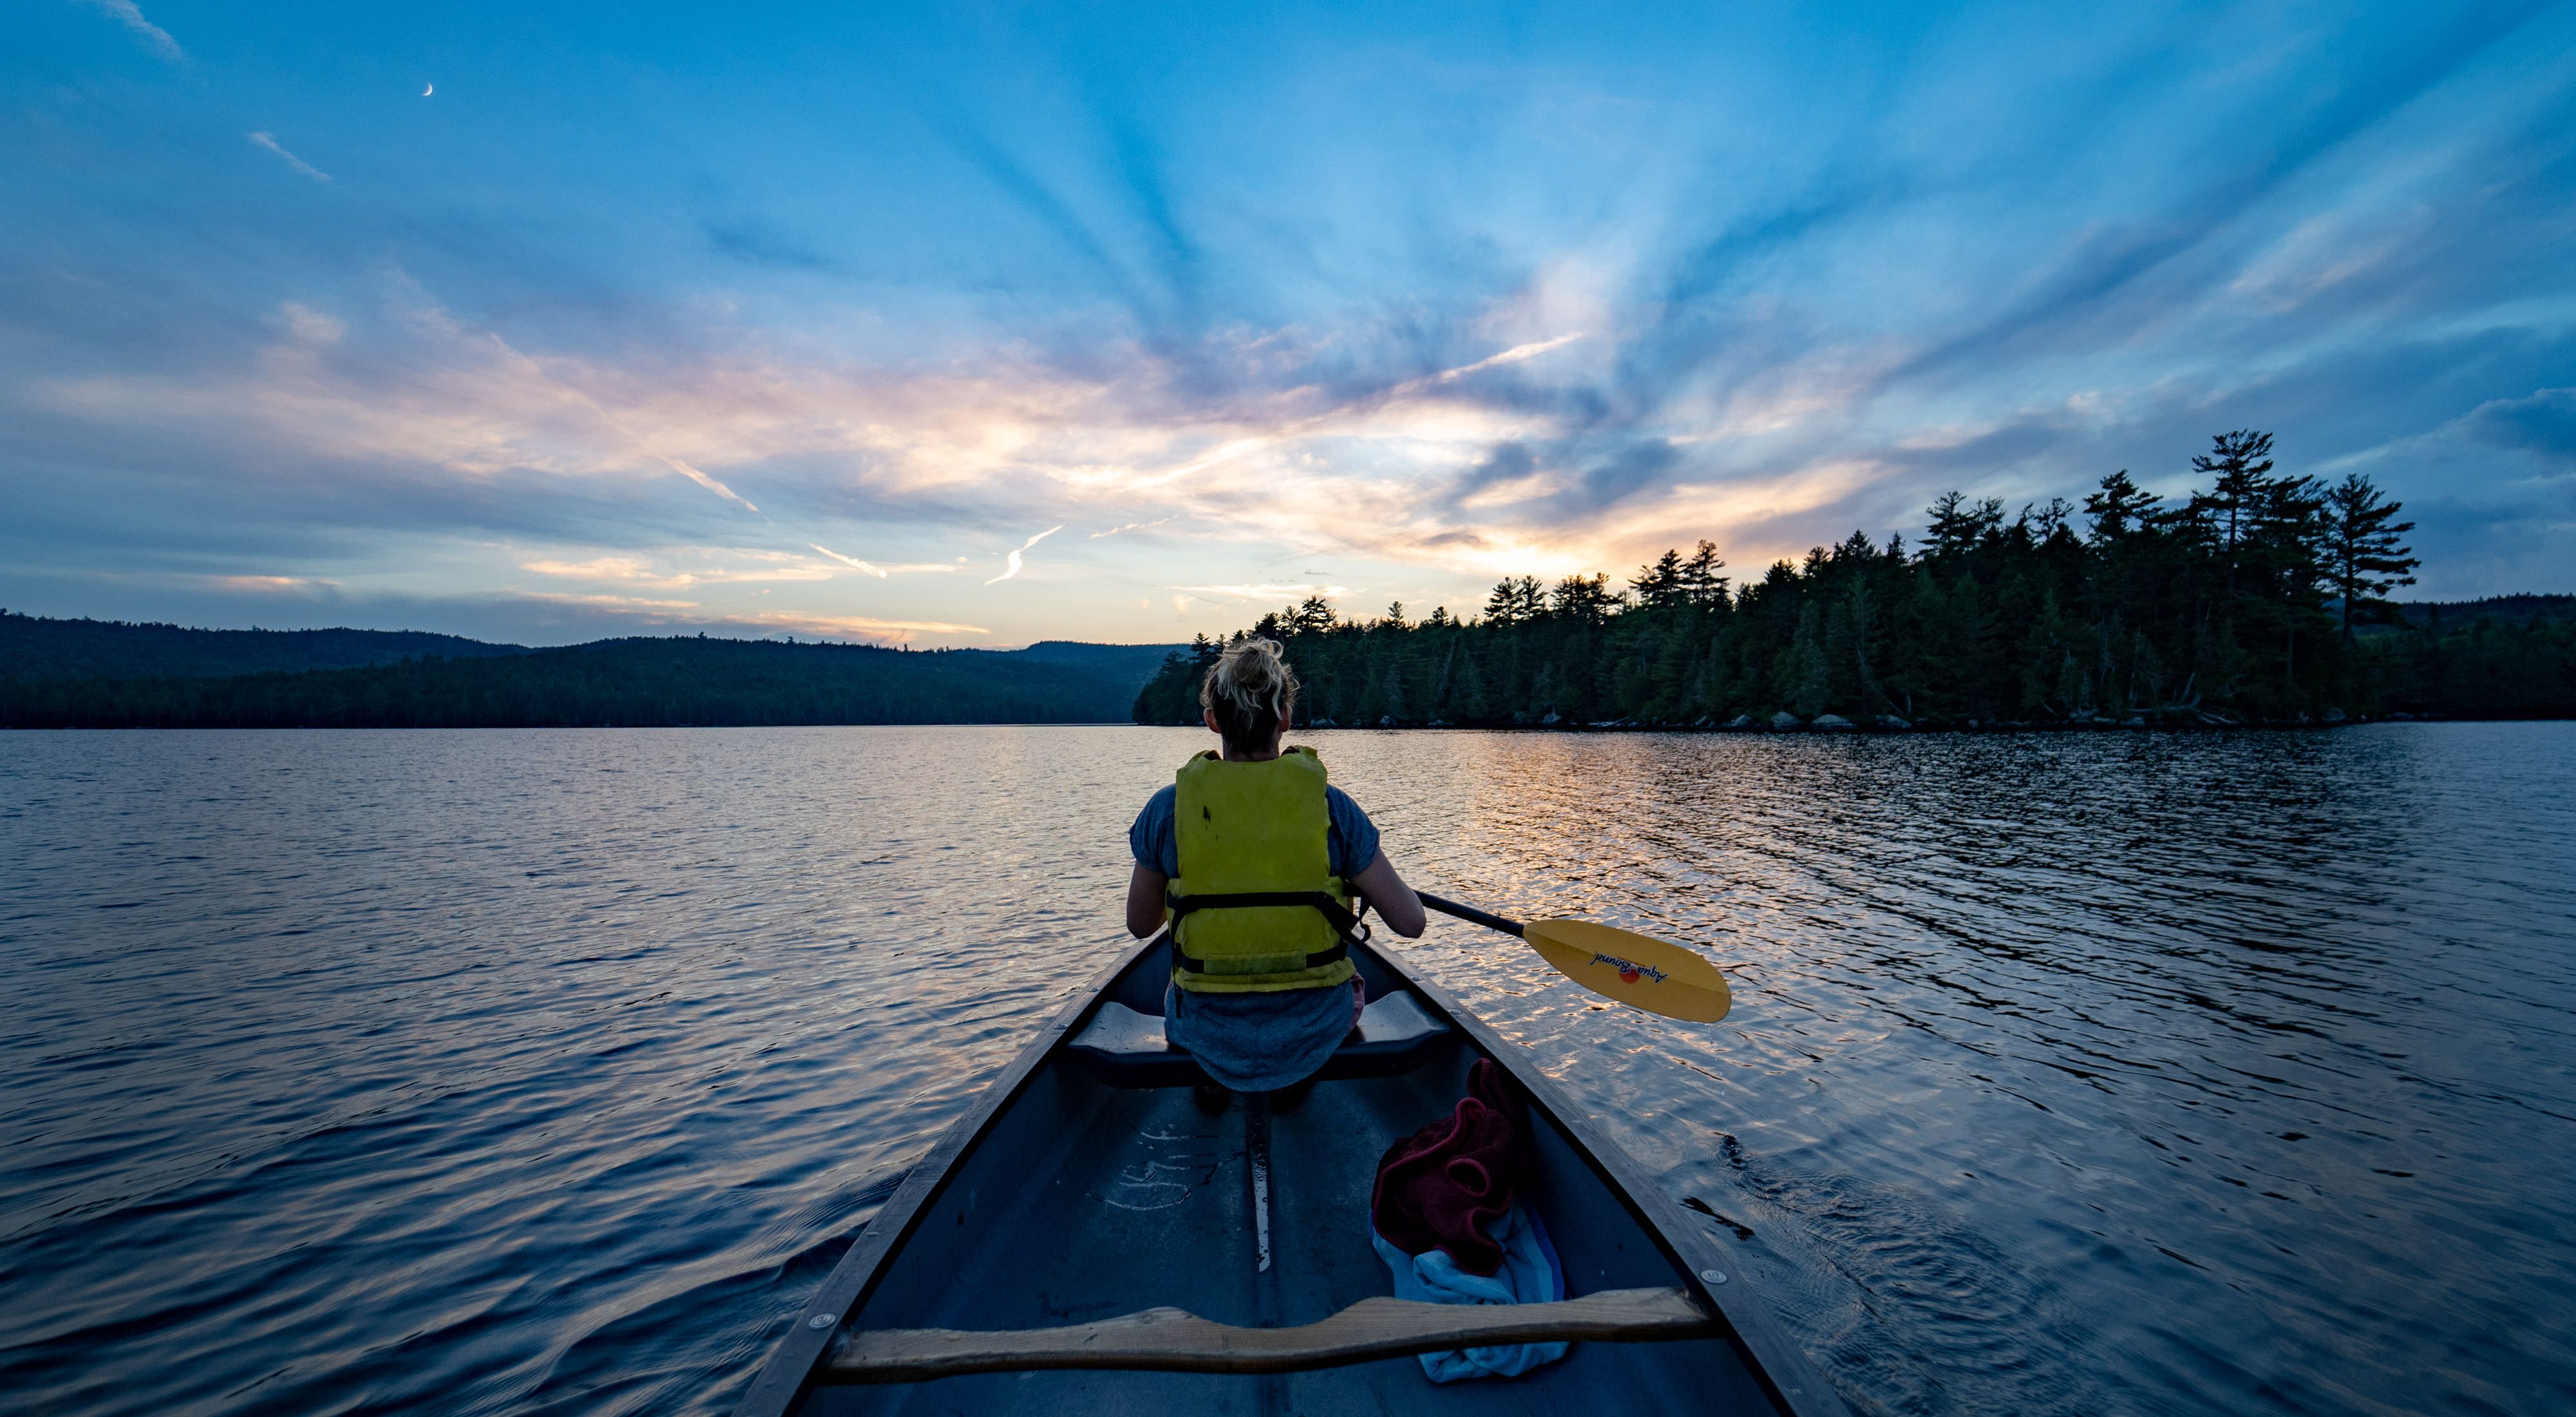 View from the stern of a canoe as the boat moves toward the setting sun.